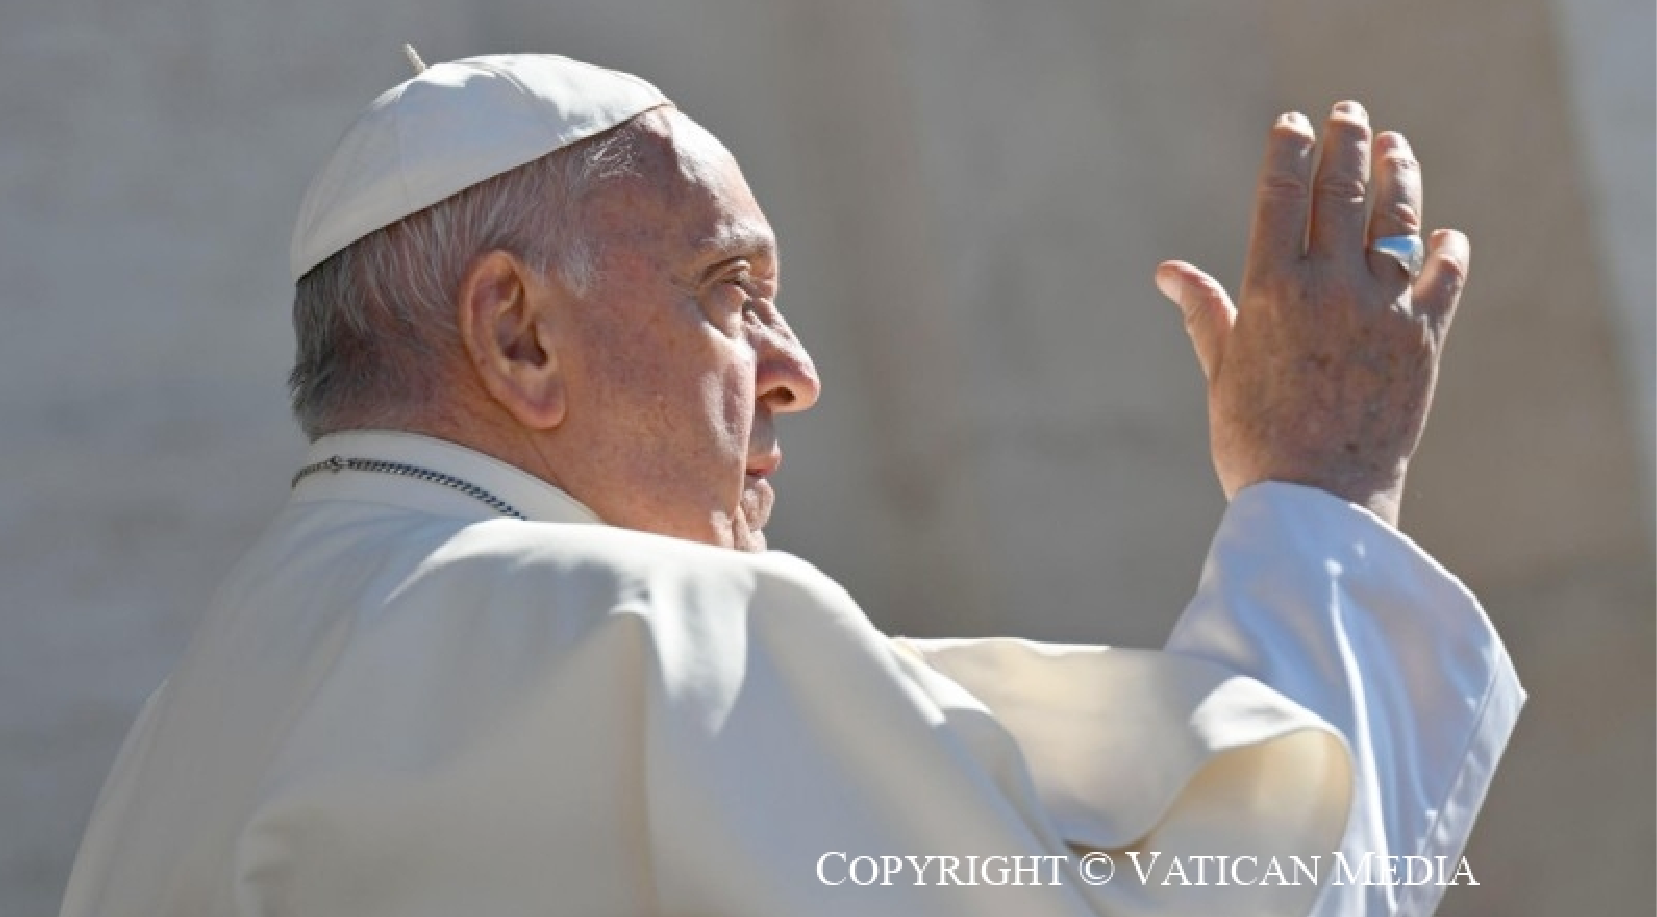 was further elaborated by the Pope during the general audience on Wednesday, June 5.